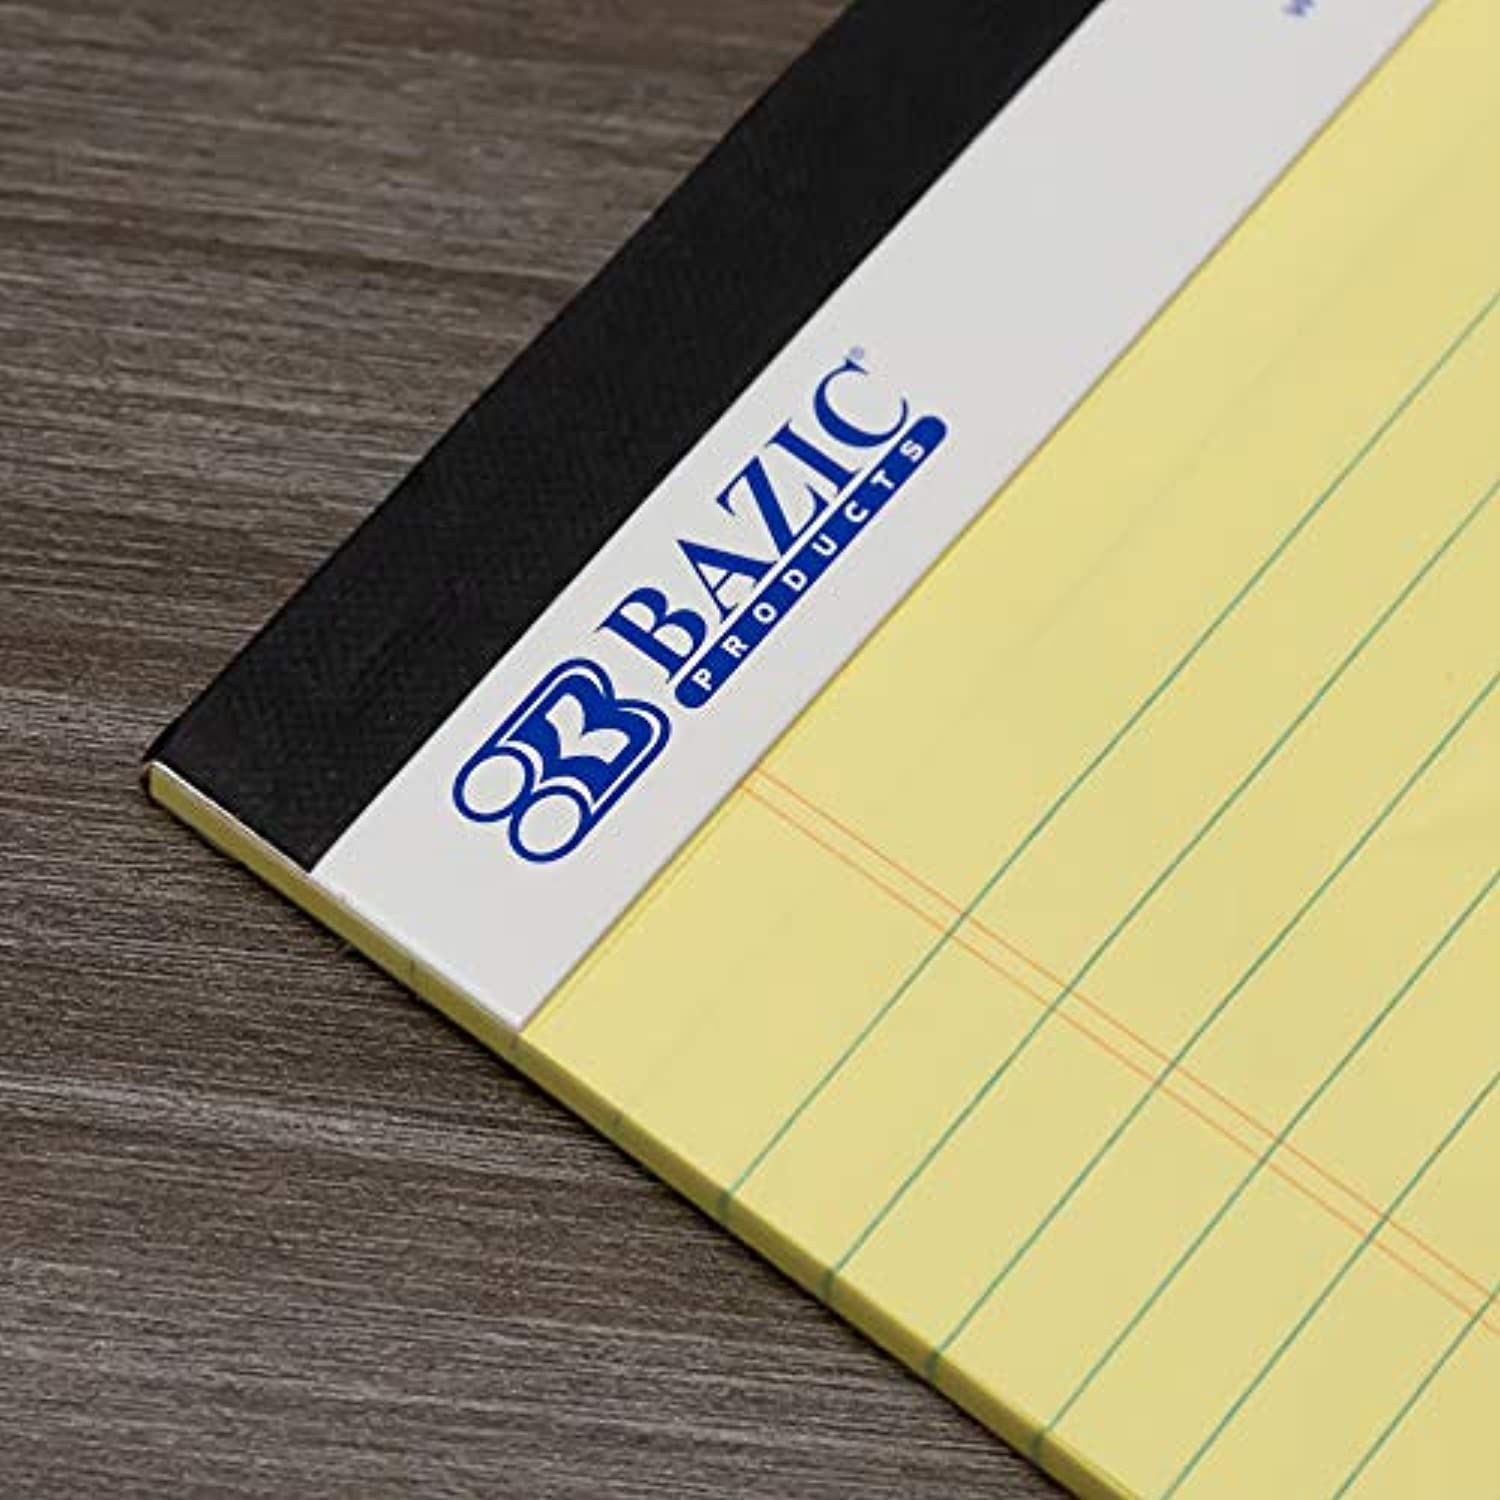 BAZIC 50 Ct. 5" X 8" Canary Jr. Perforated Writing Pad, Lined Ruled Memo Writing Papers Pads, Note Paper for Taking Notes, Yellow(2/Pack), 6-Pack (Total 12 Pads).